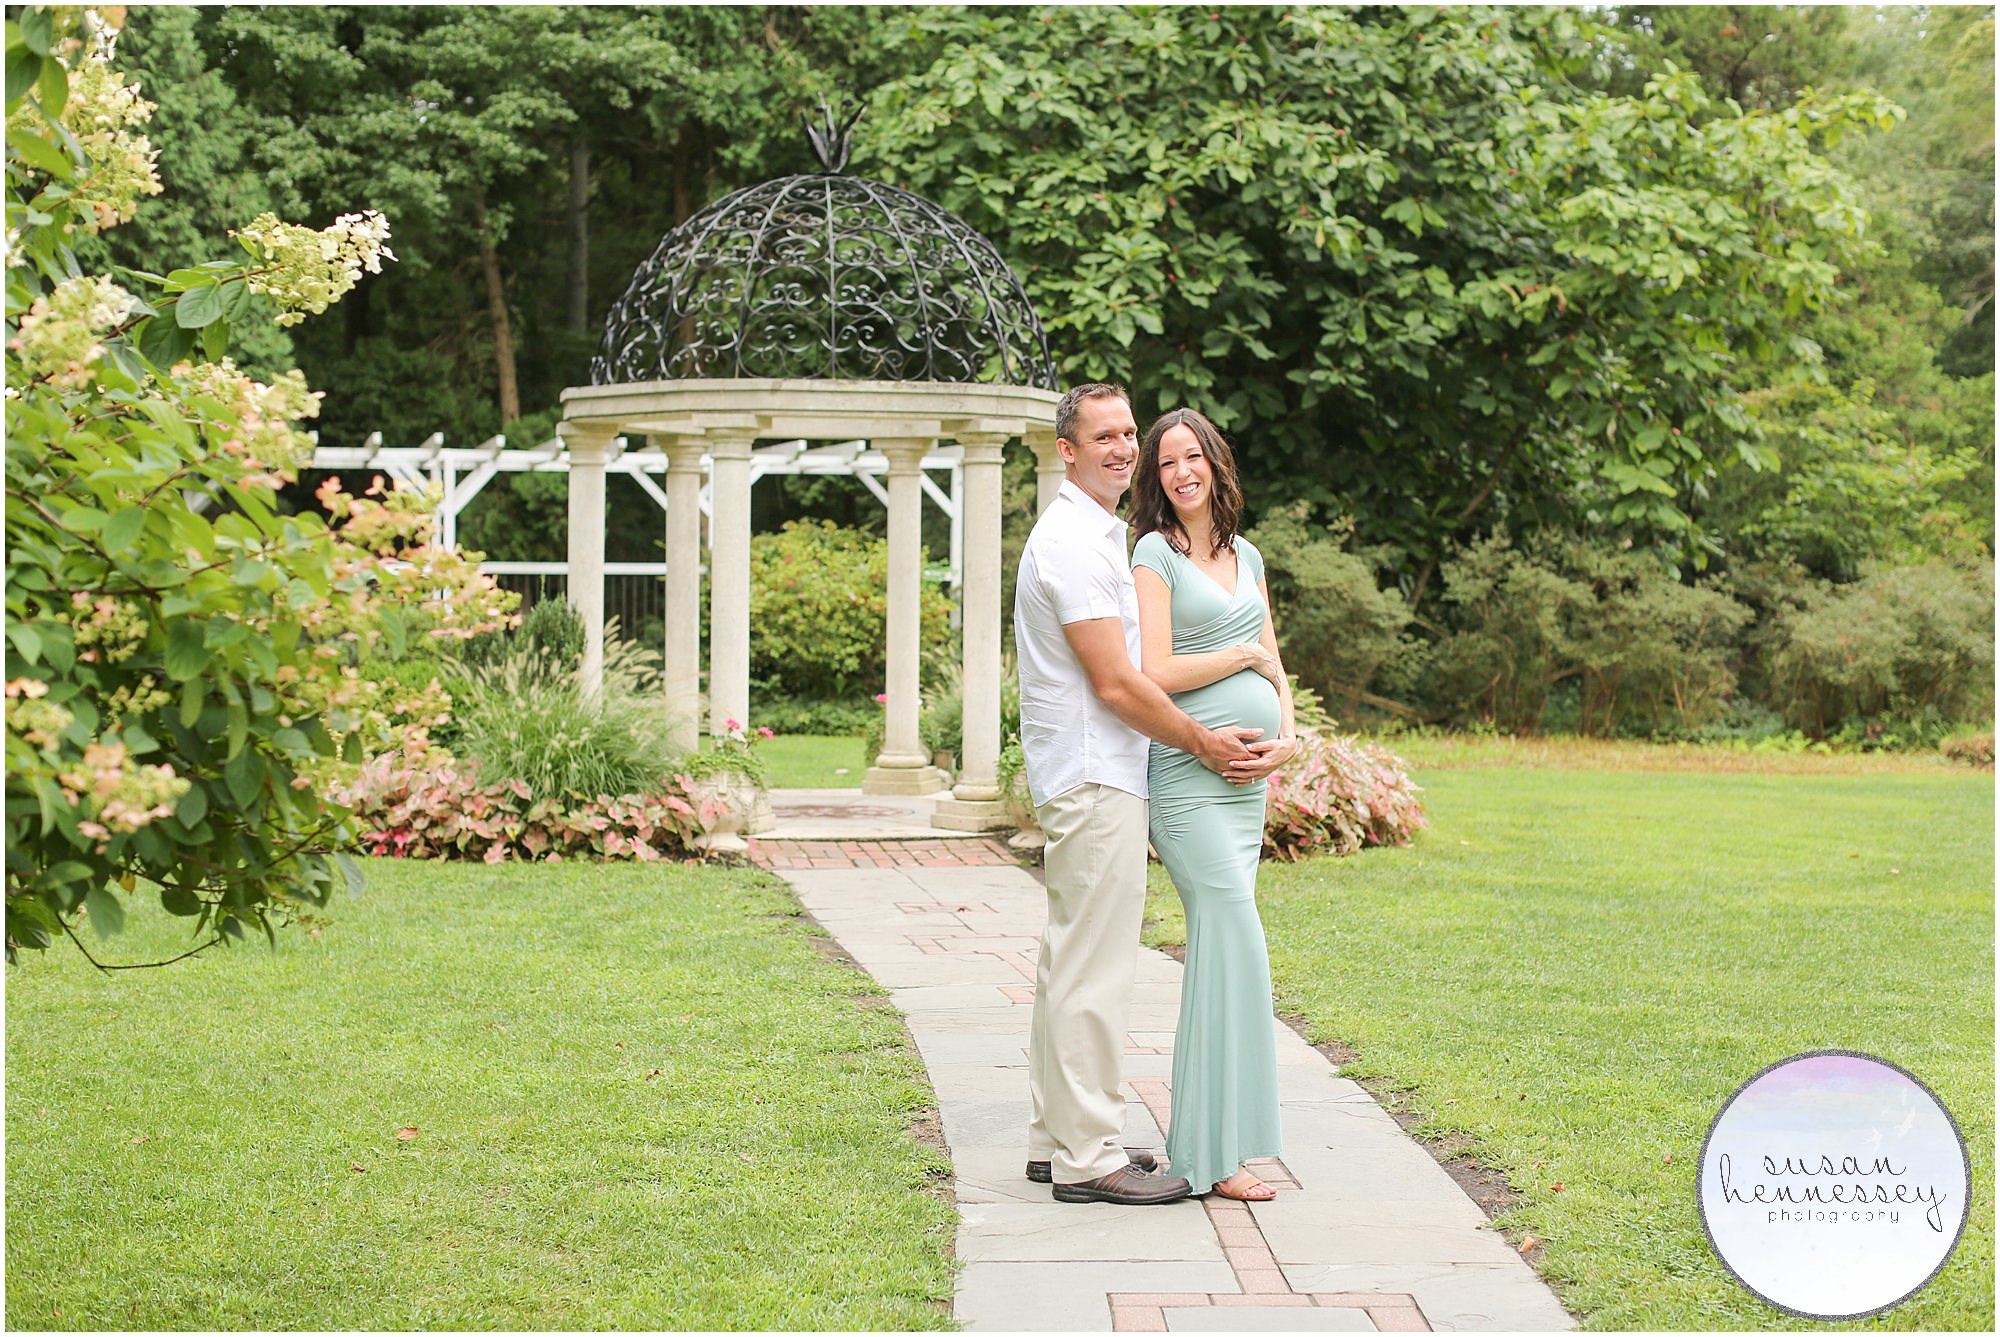 Expectant mother and her husband at their South Jersey maternity session